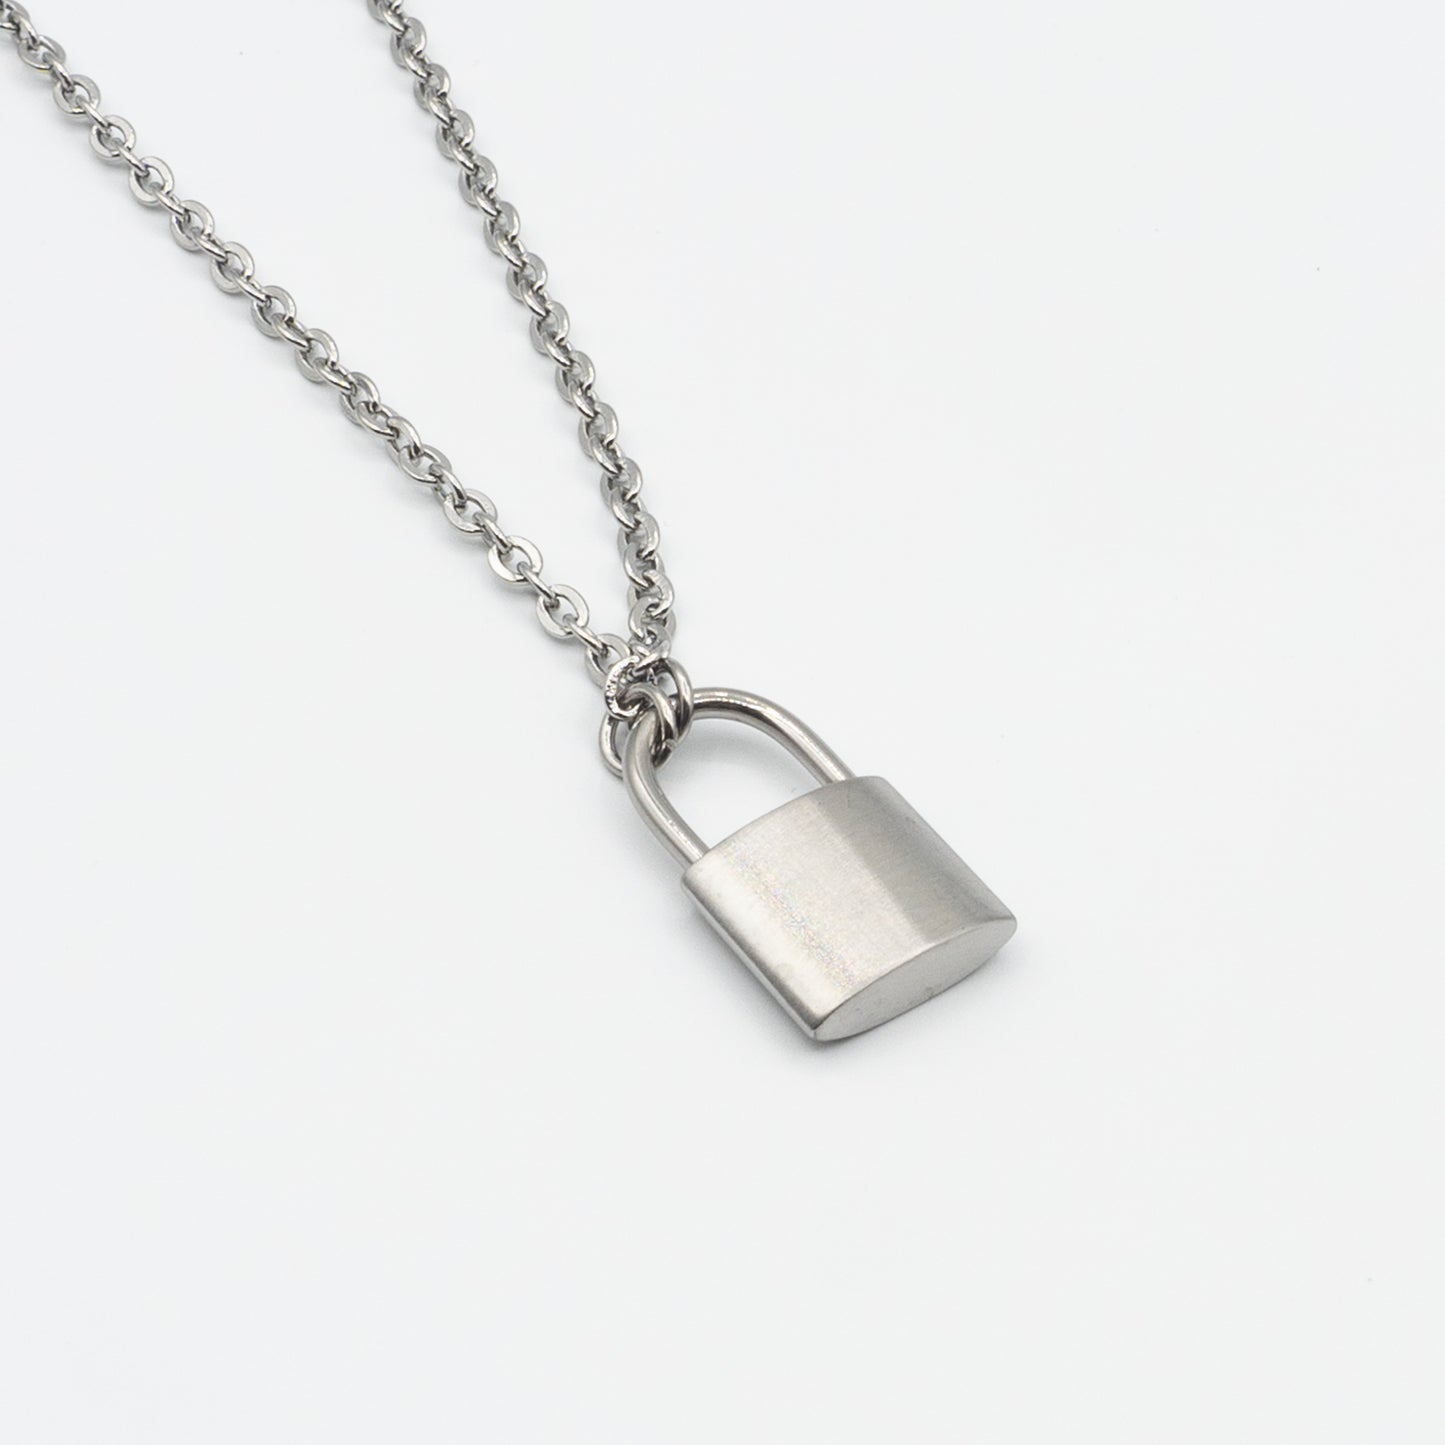 LOCK -stainless steel lock necklace